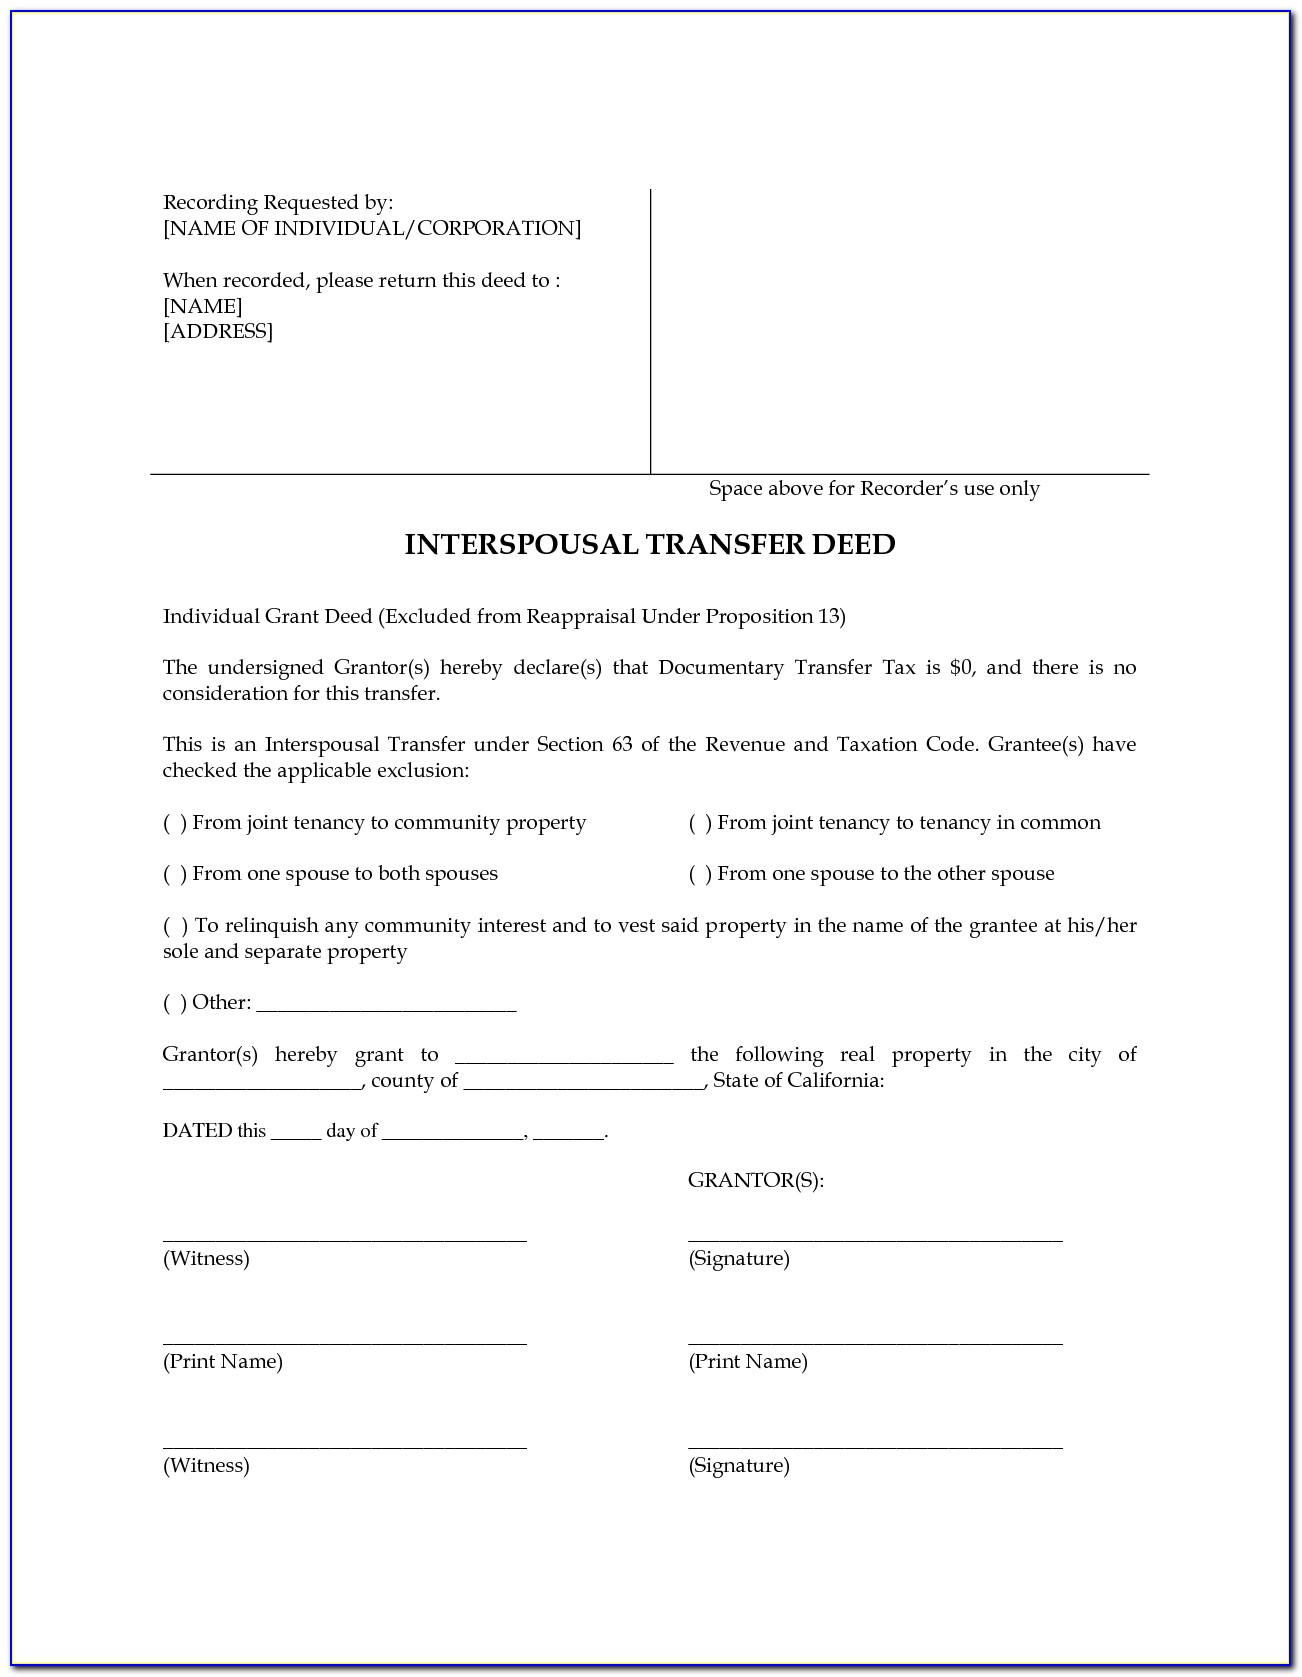 Interspousal Transfer Deed Form Los Angeles County